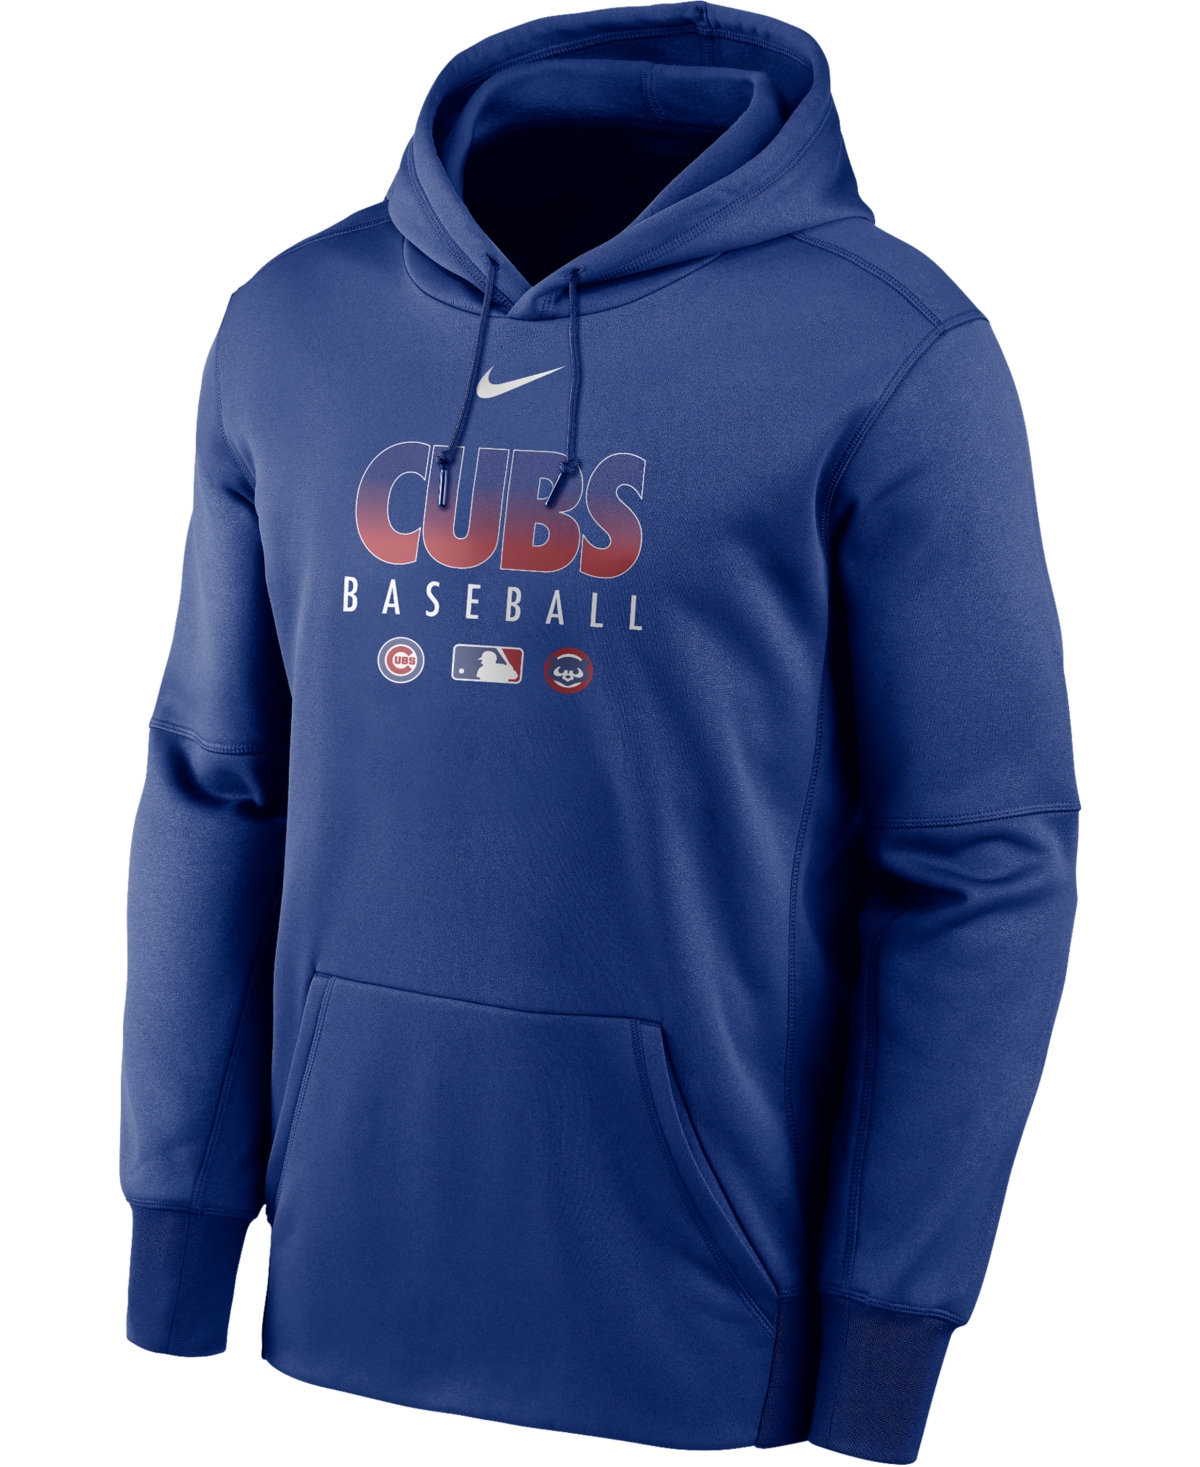 Nike Men's Chicago Cubs Authentic Collection Therma Dugout Hoodie